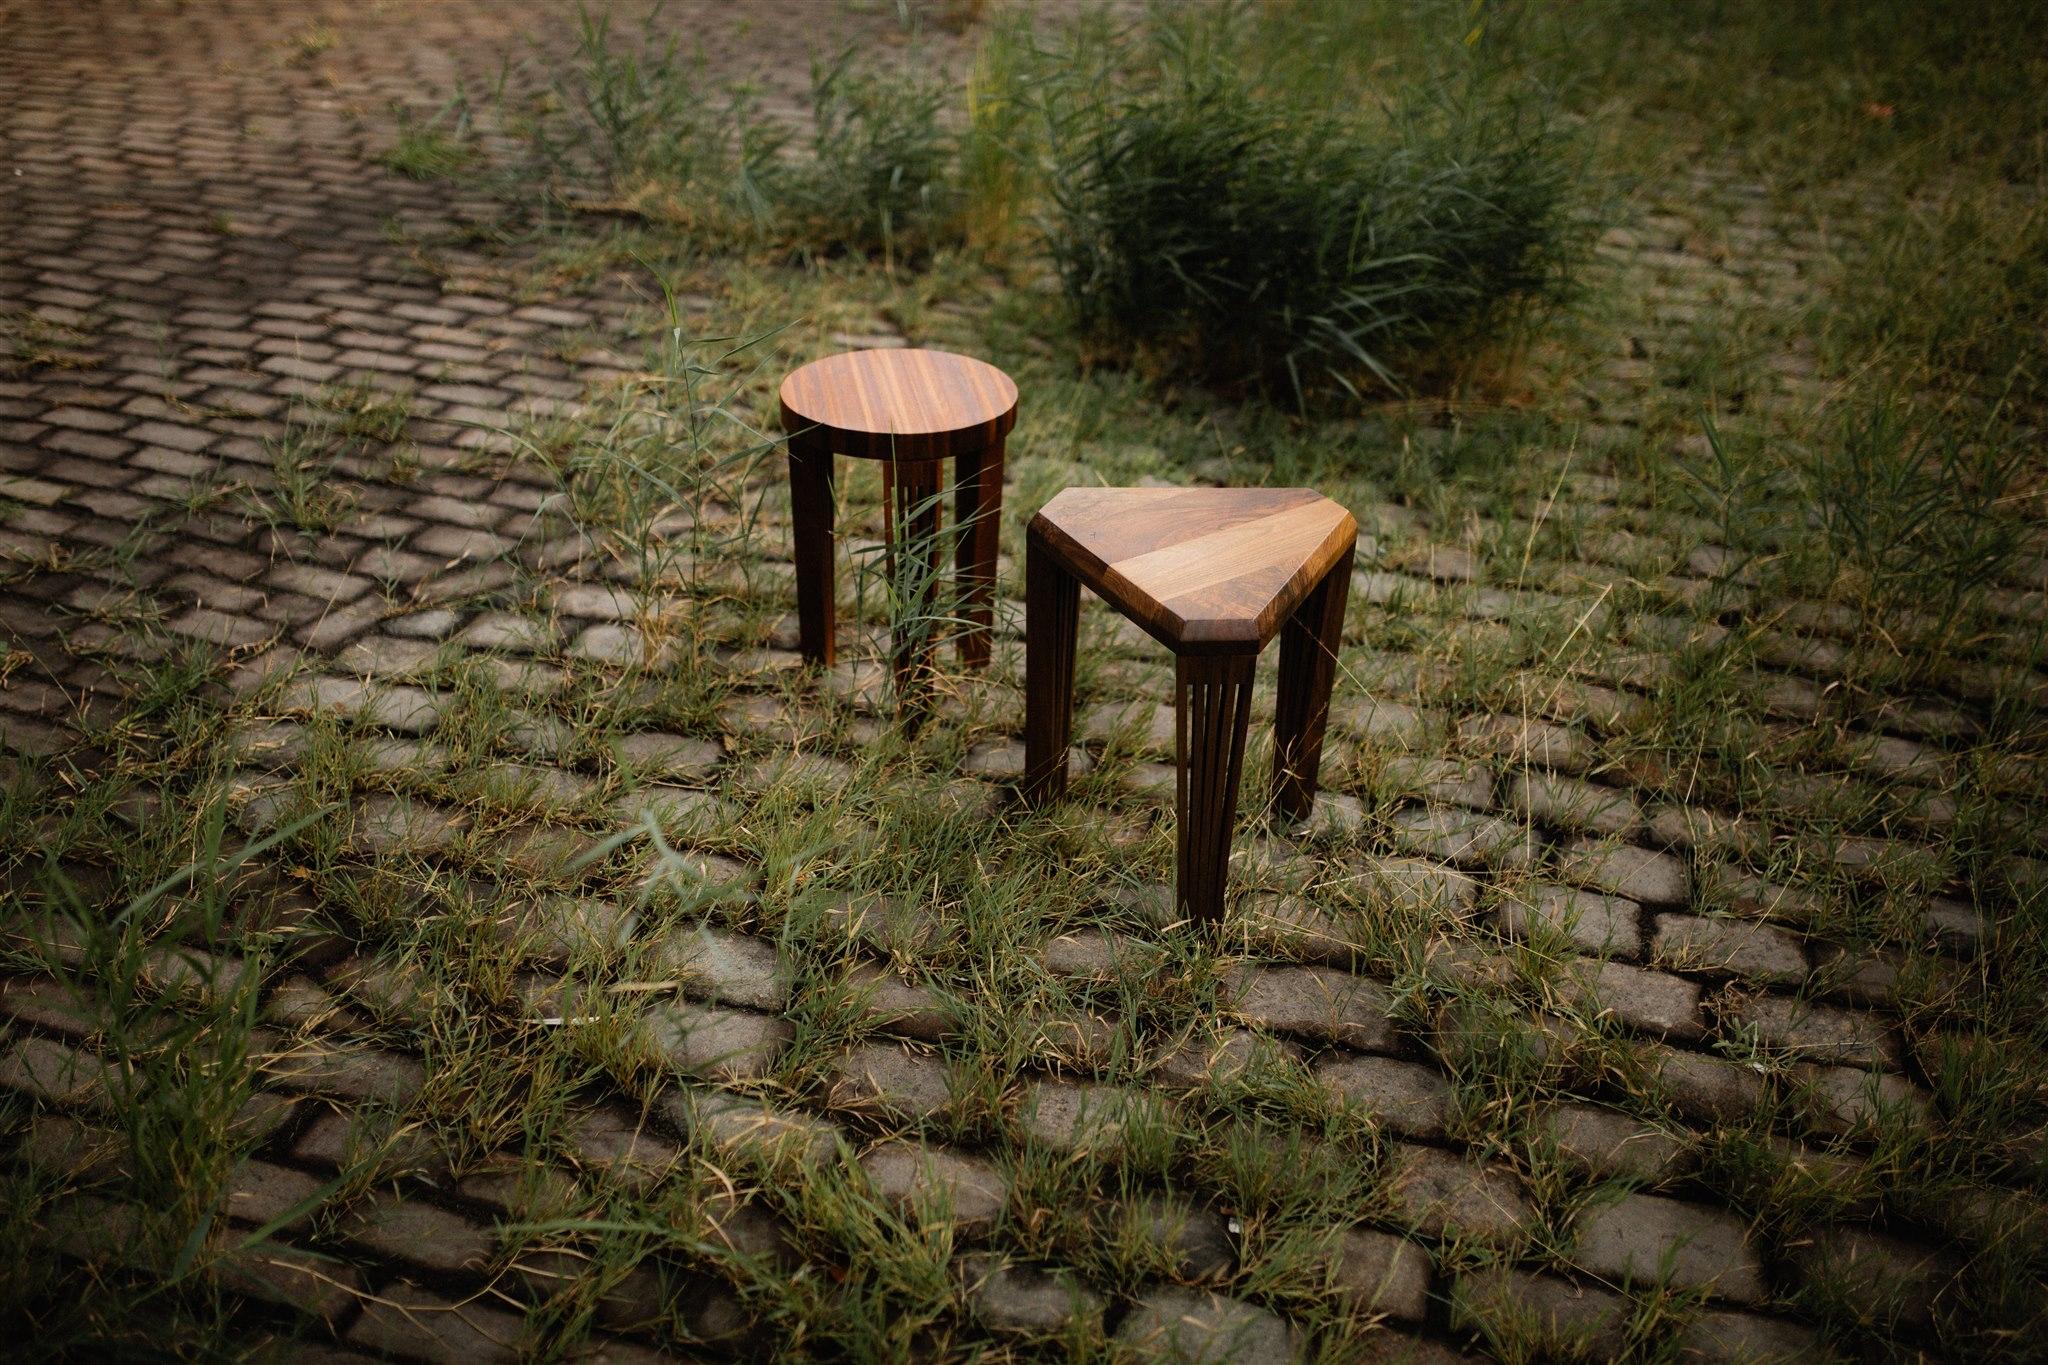 Set of 2 redemption stools by Albert Potgieter Designs
Dimensions: H 45 x W 40 cm
Materials: Walnut and mahogany wood



“Look and Feel designs”, this is the Tagline and the way of designing of Albert Potgieter. Albert was a qualified